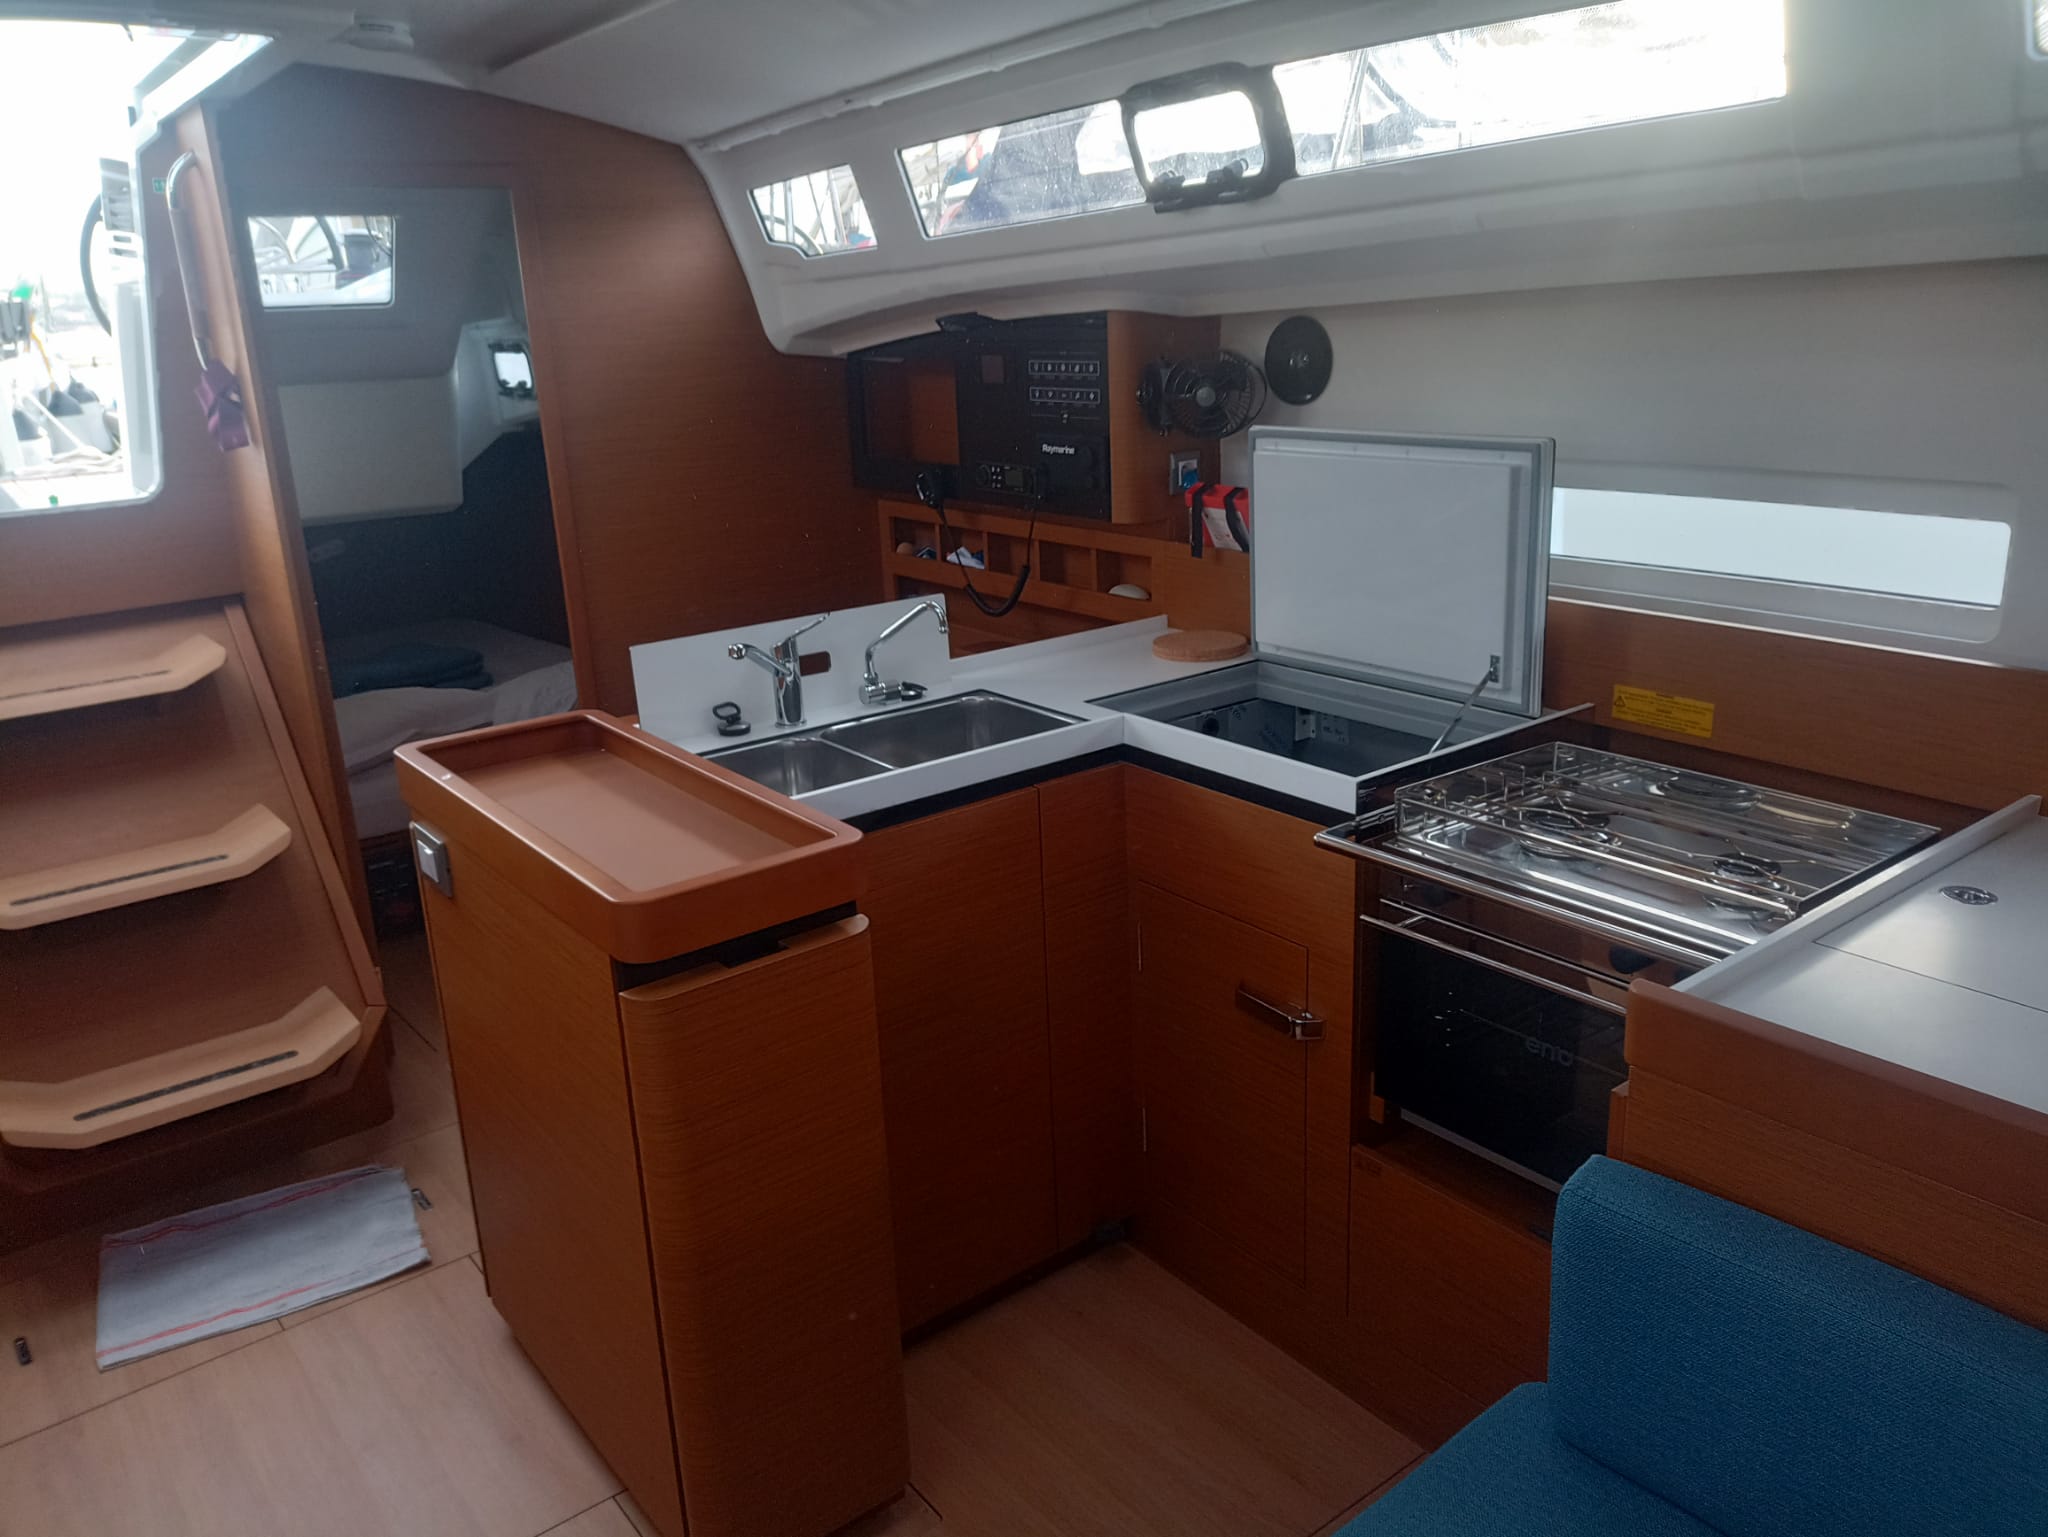 L'OURS, Sun Odyssey 349 - 2017 - 3 cabines + 1 sdb